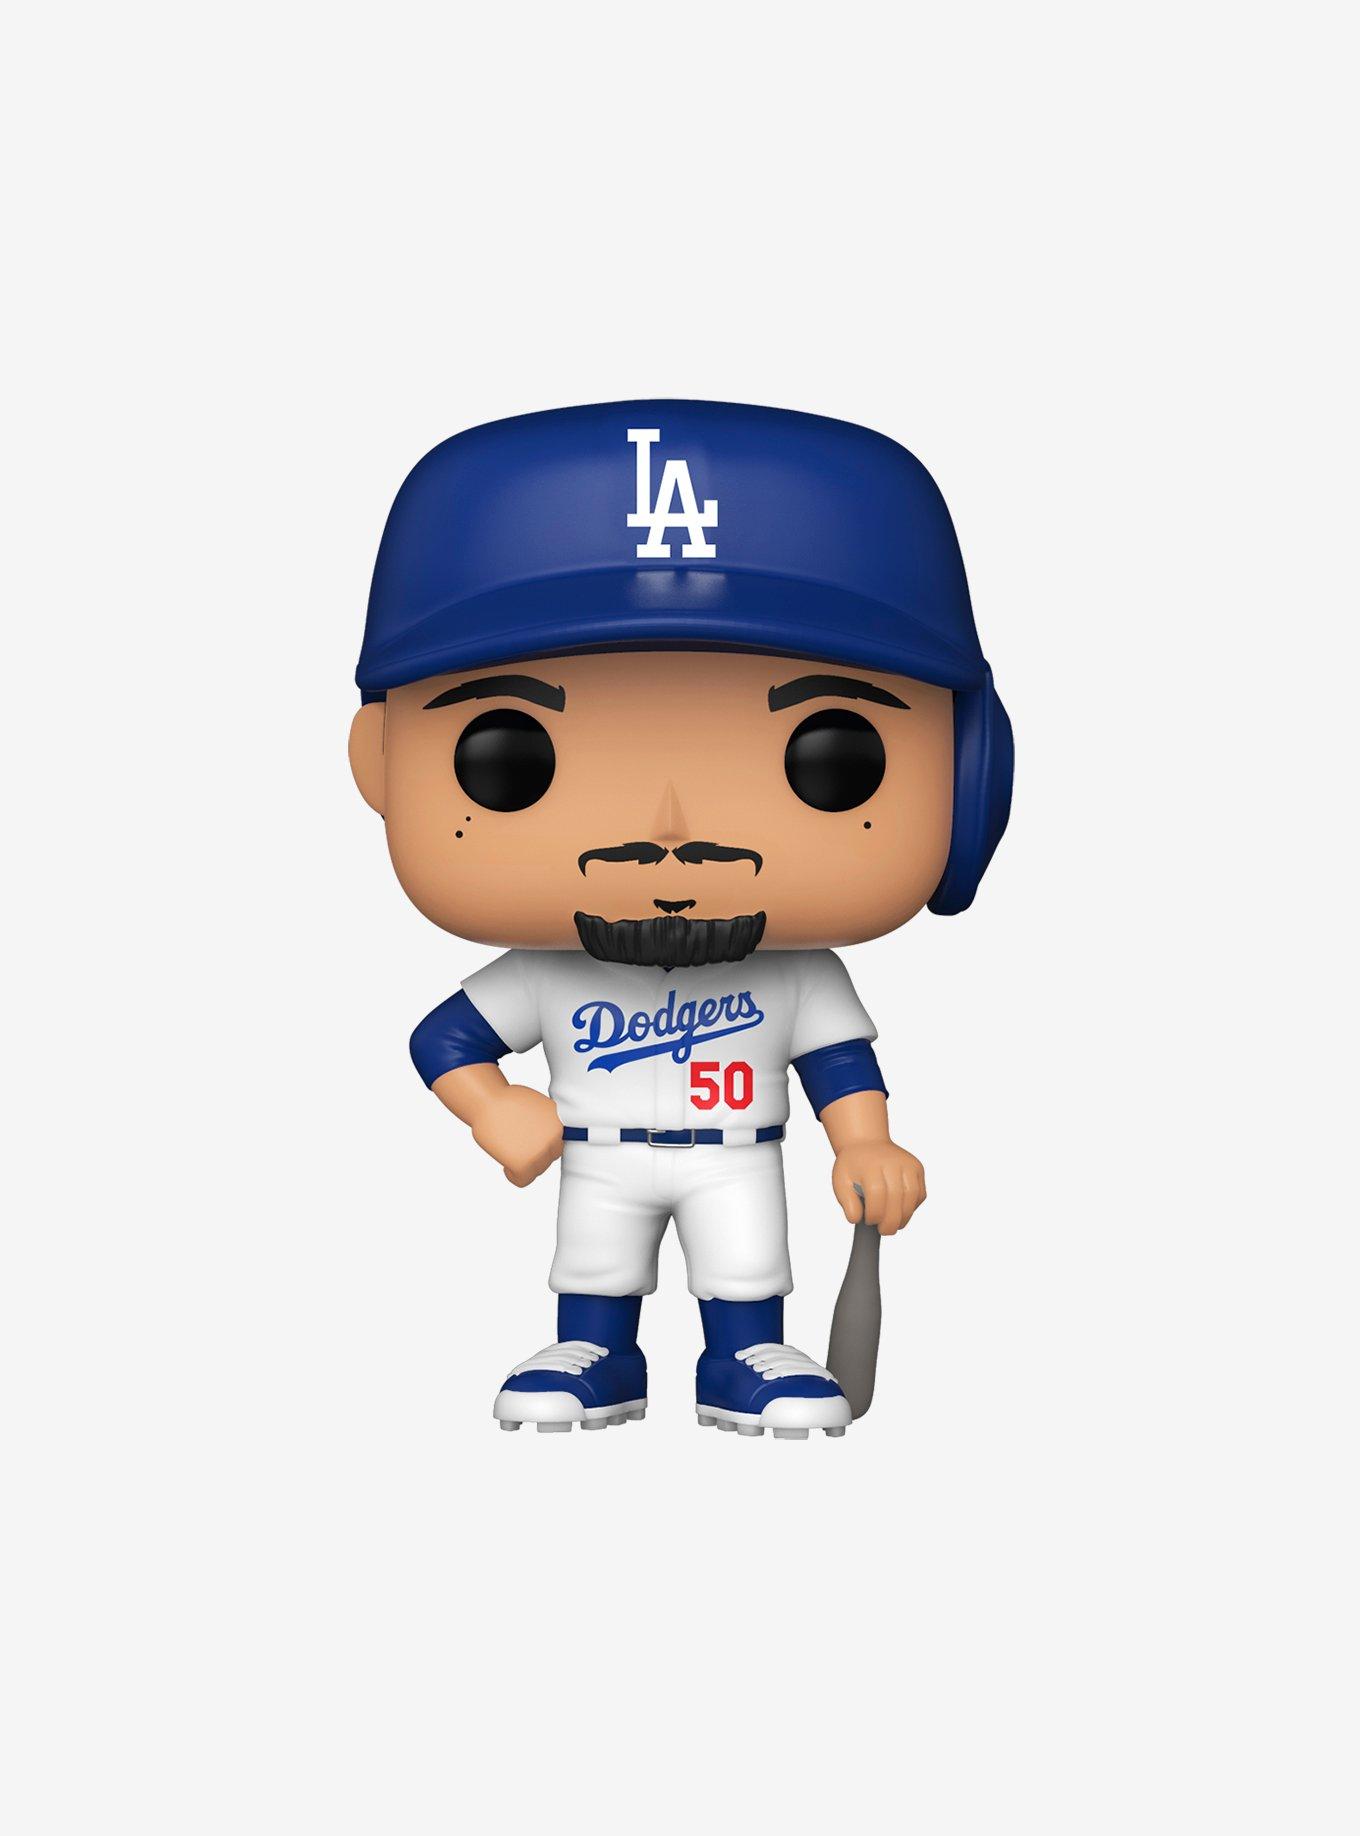 View Pin: Mickey Mouse - Major League Baseball Player - Los Angeles Dodgers